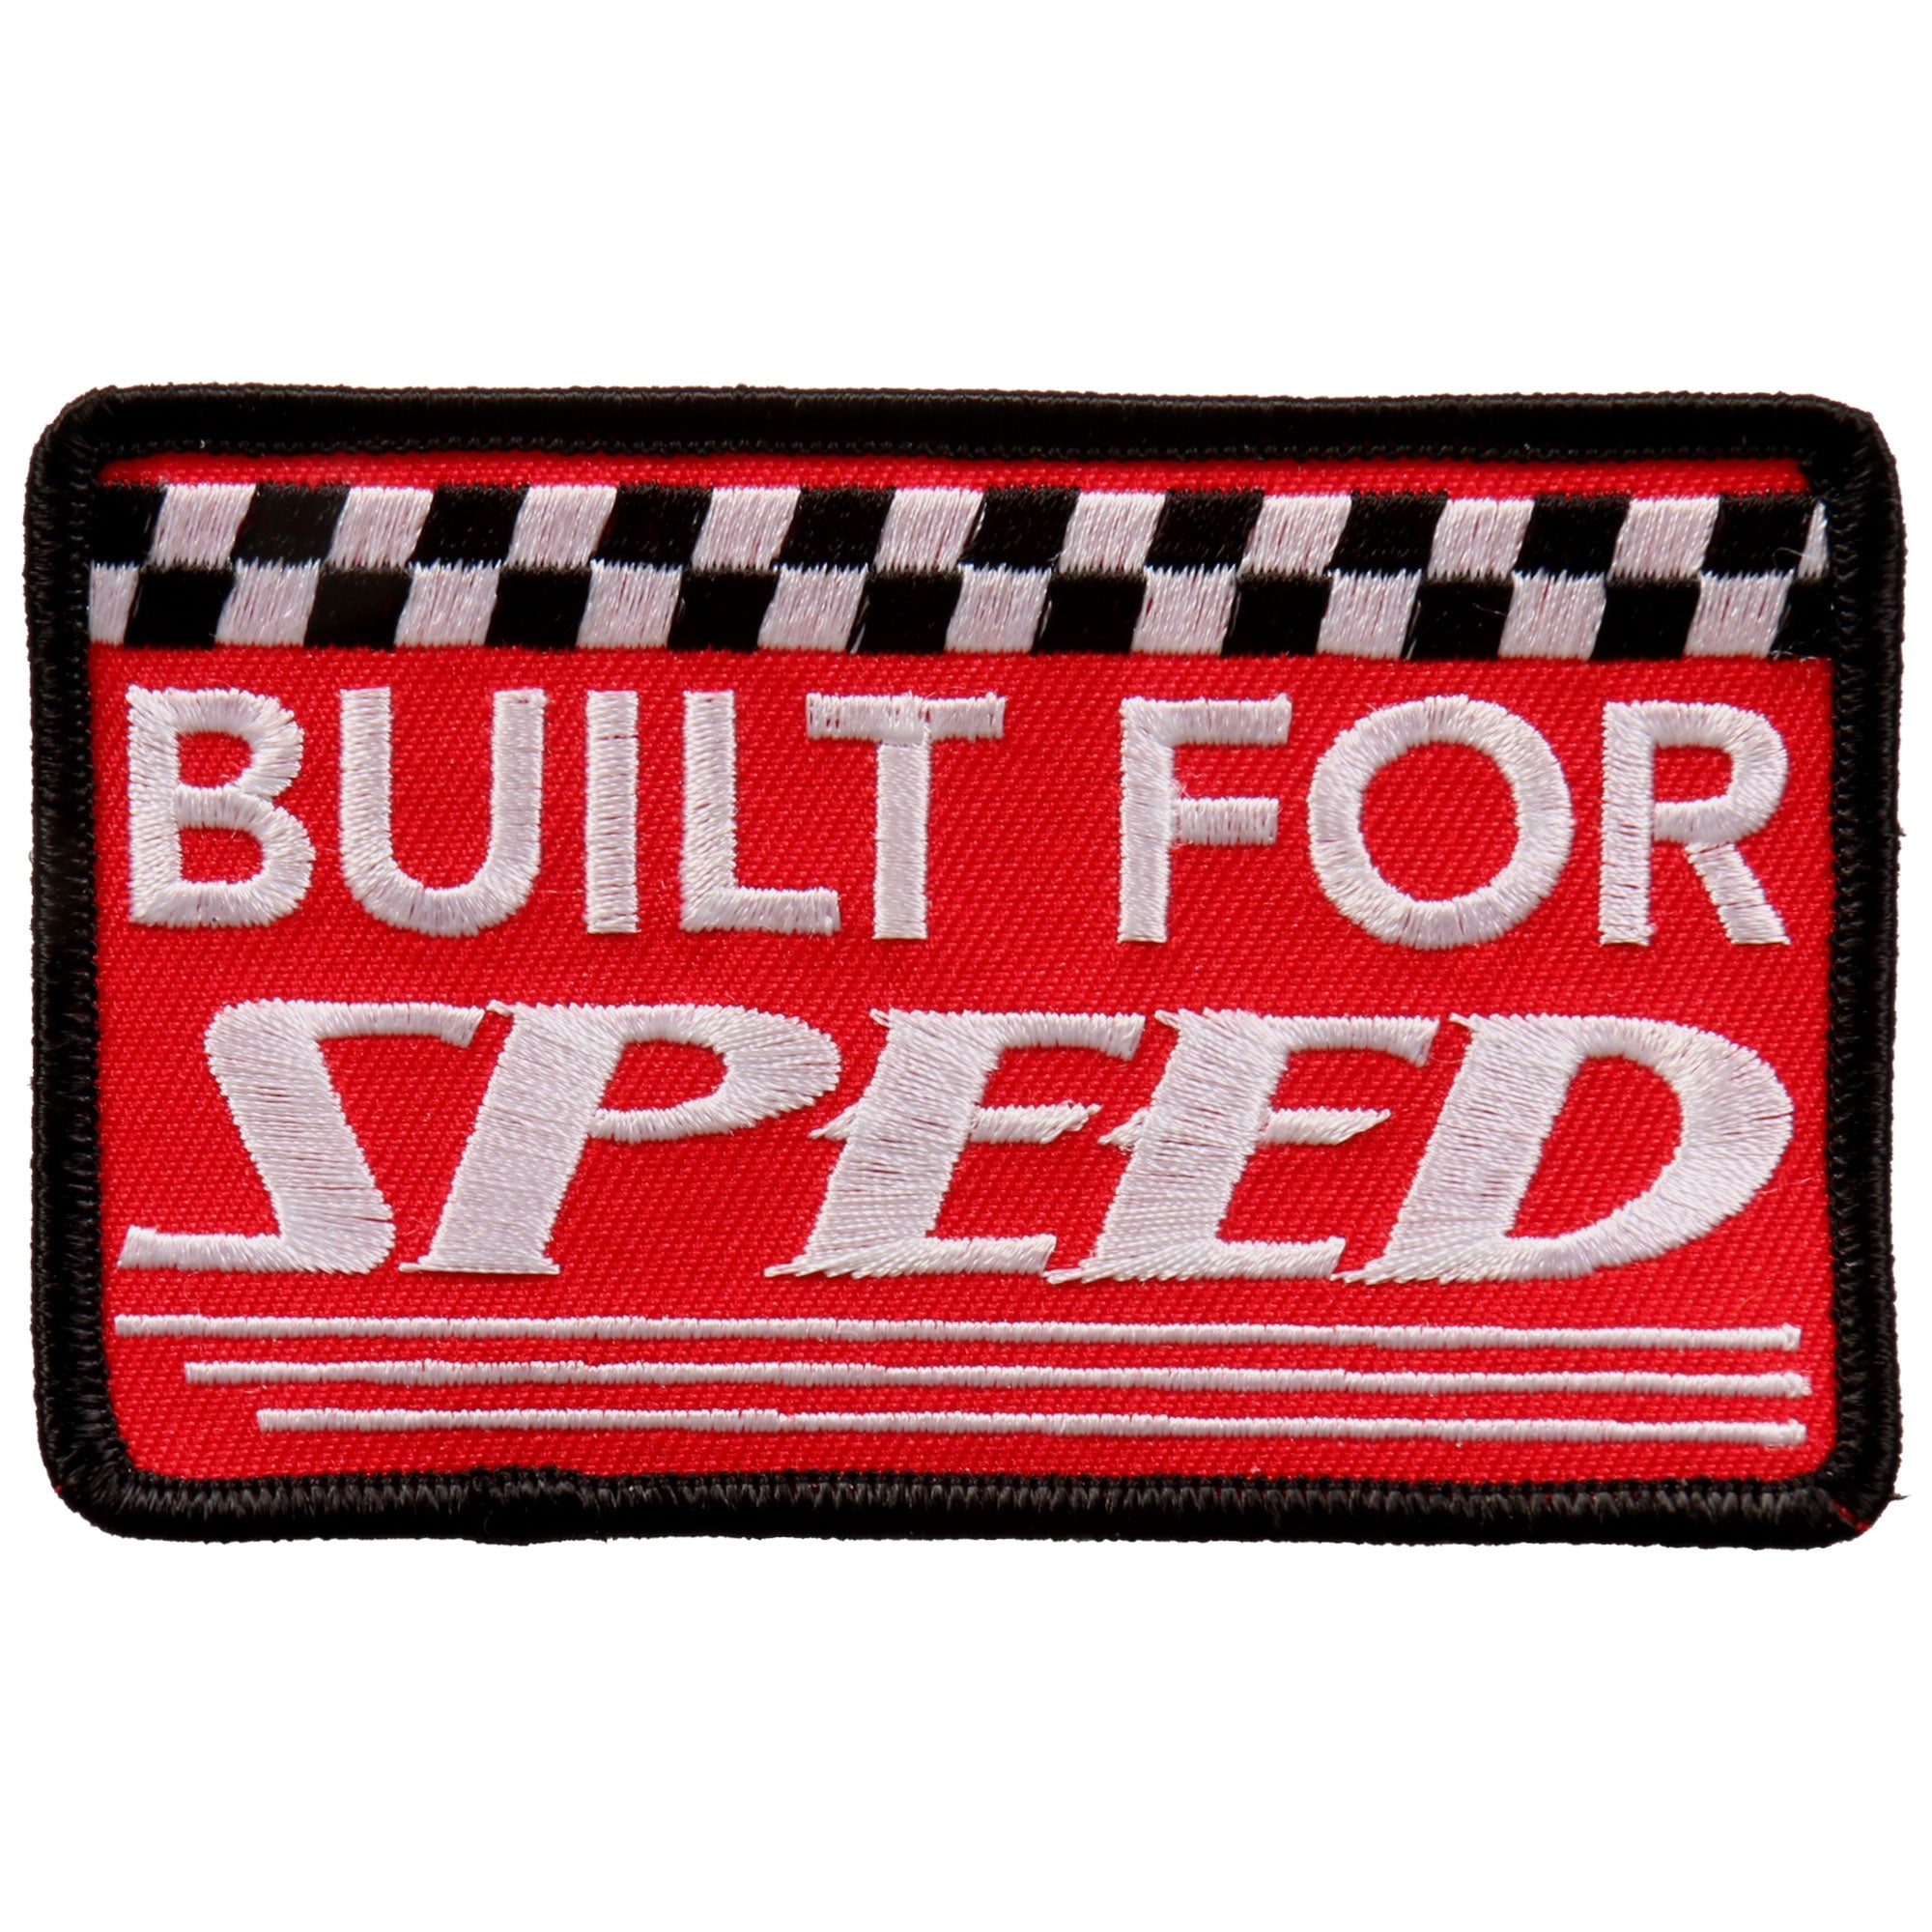 Hot Leathers PPL9674 Built for Speed 4"x3" Patch